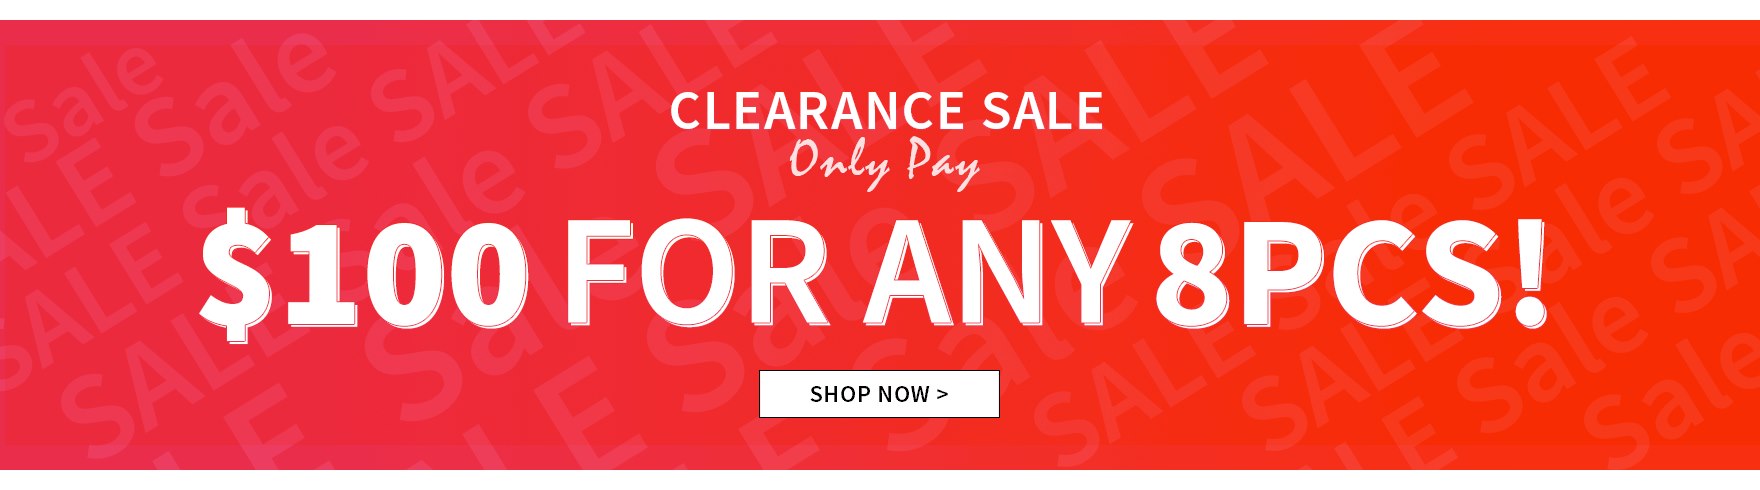 Trending items with the discount up to 60% off